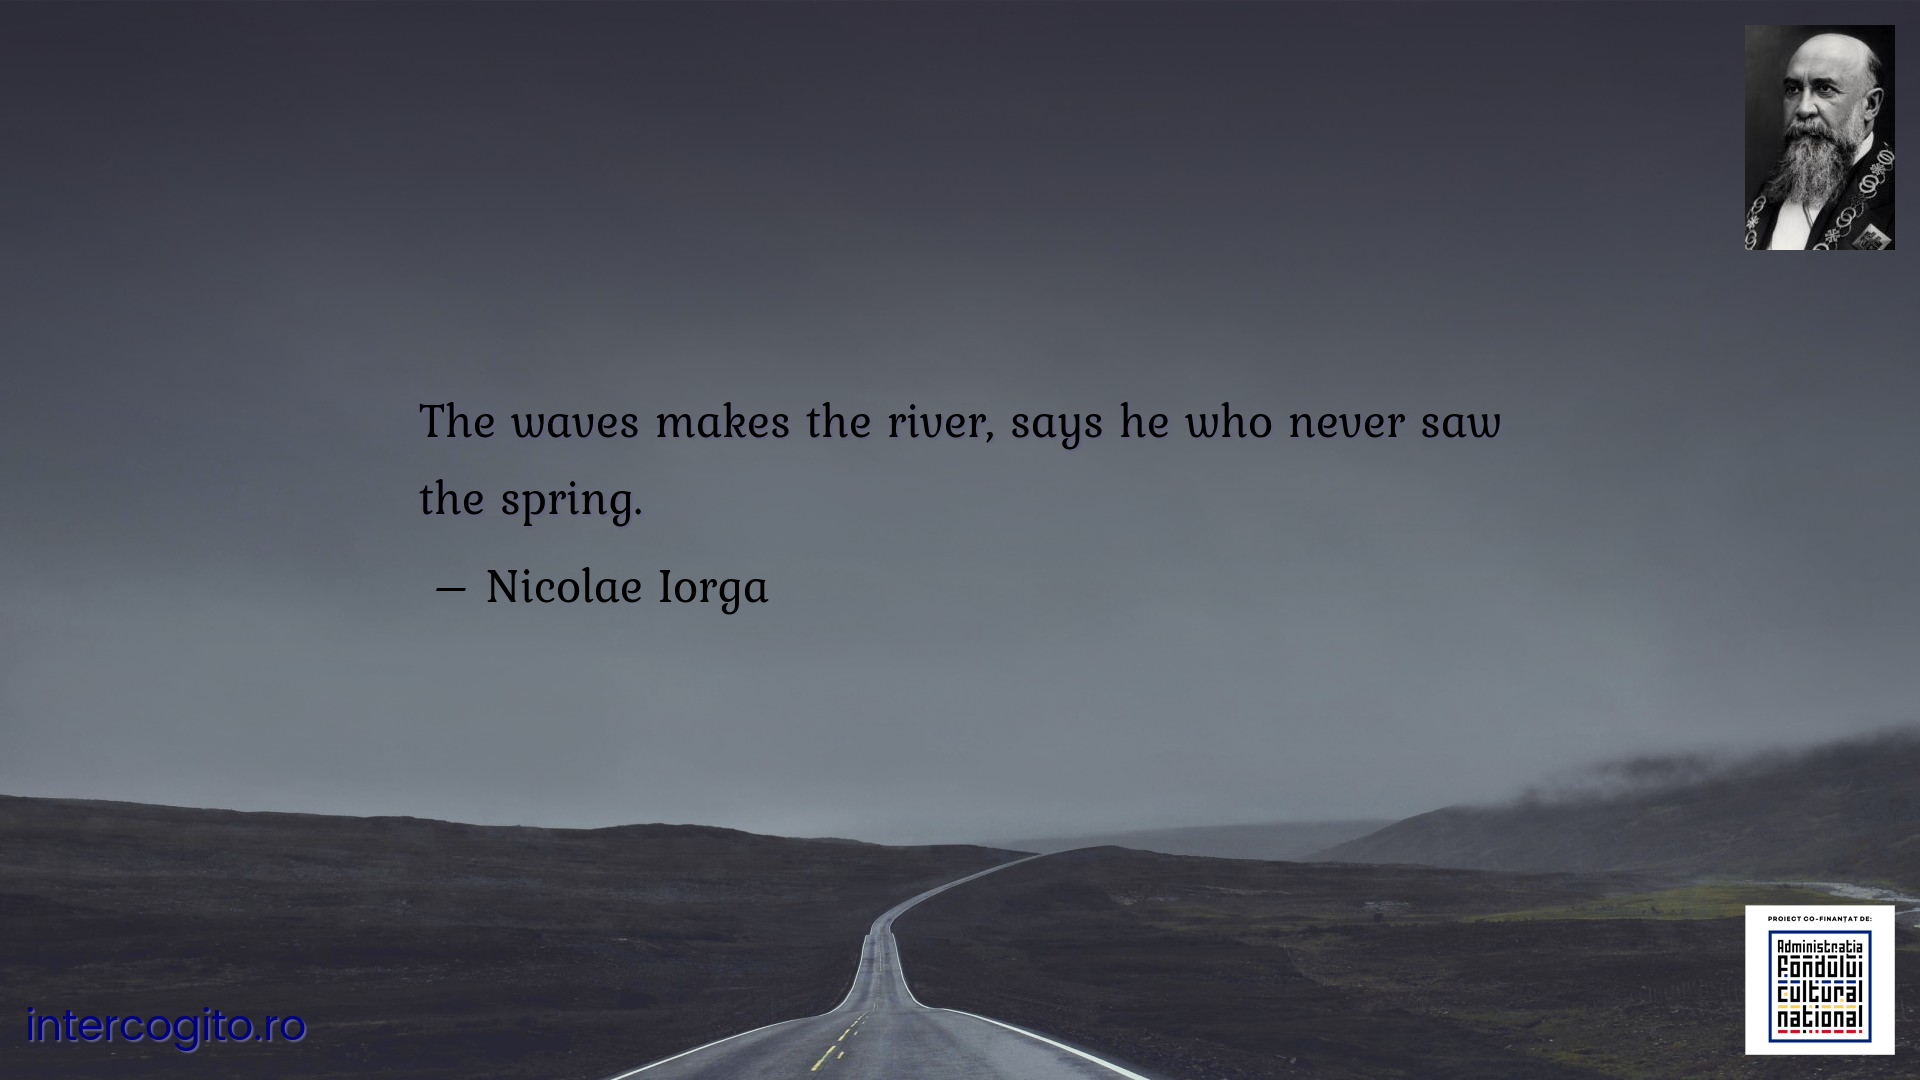 The waves makes the river, says he who never saw the spring.